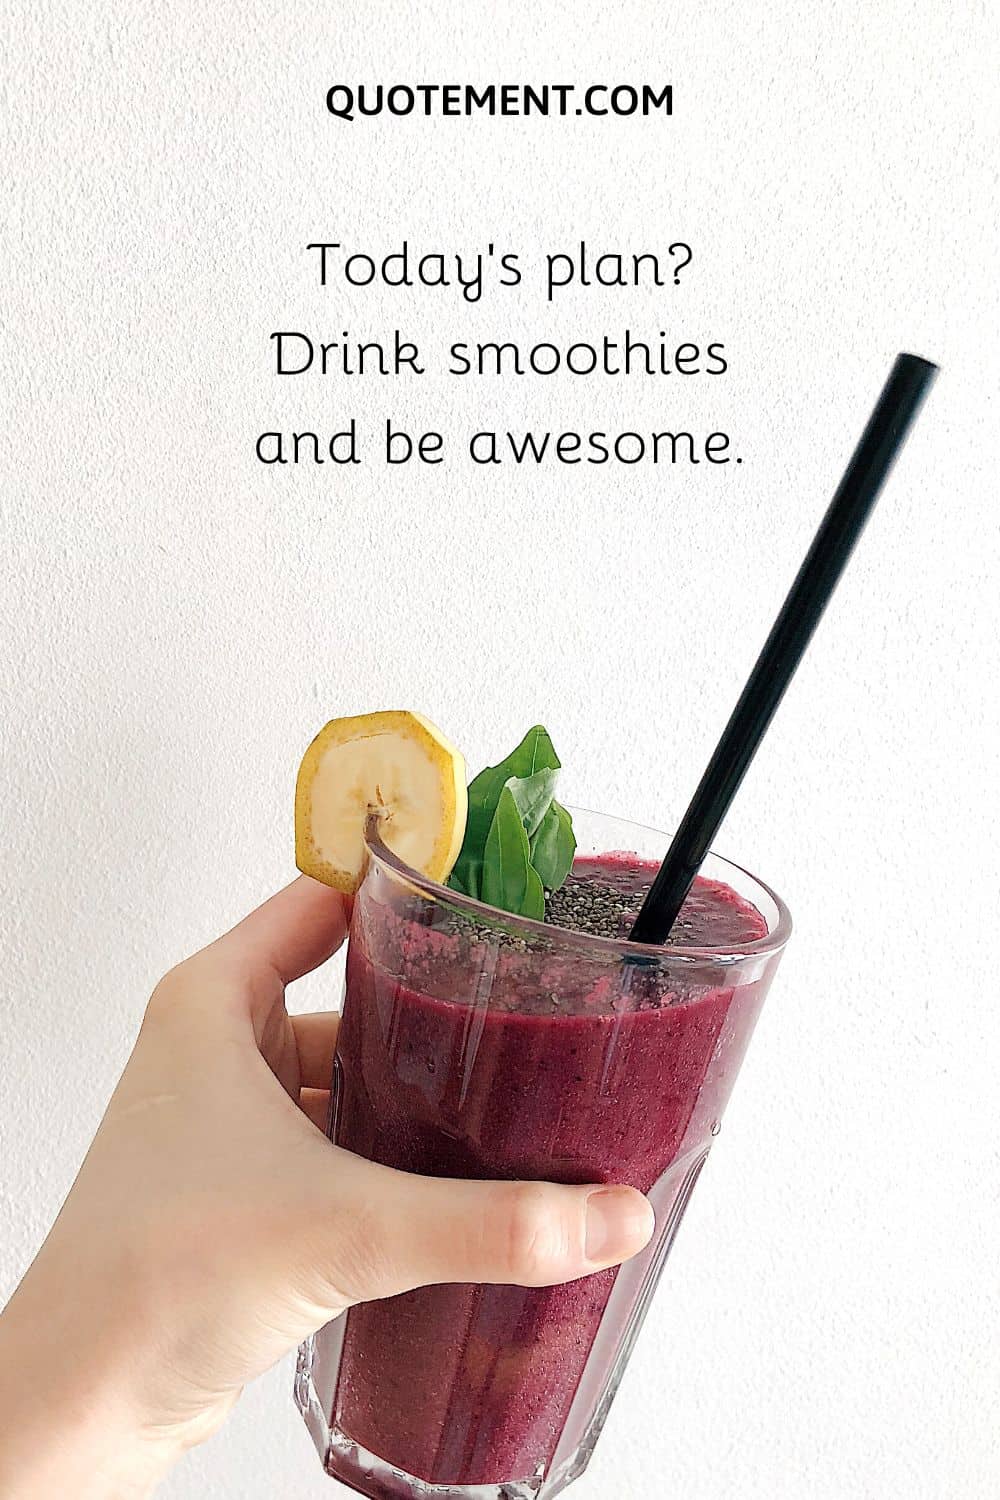 Today’s plan Drink smoothies and be awesome.